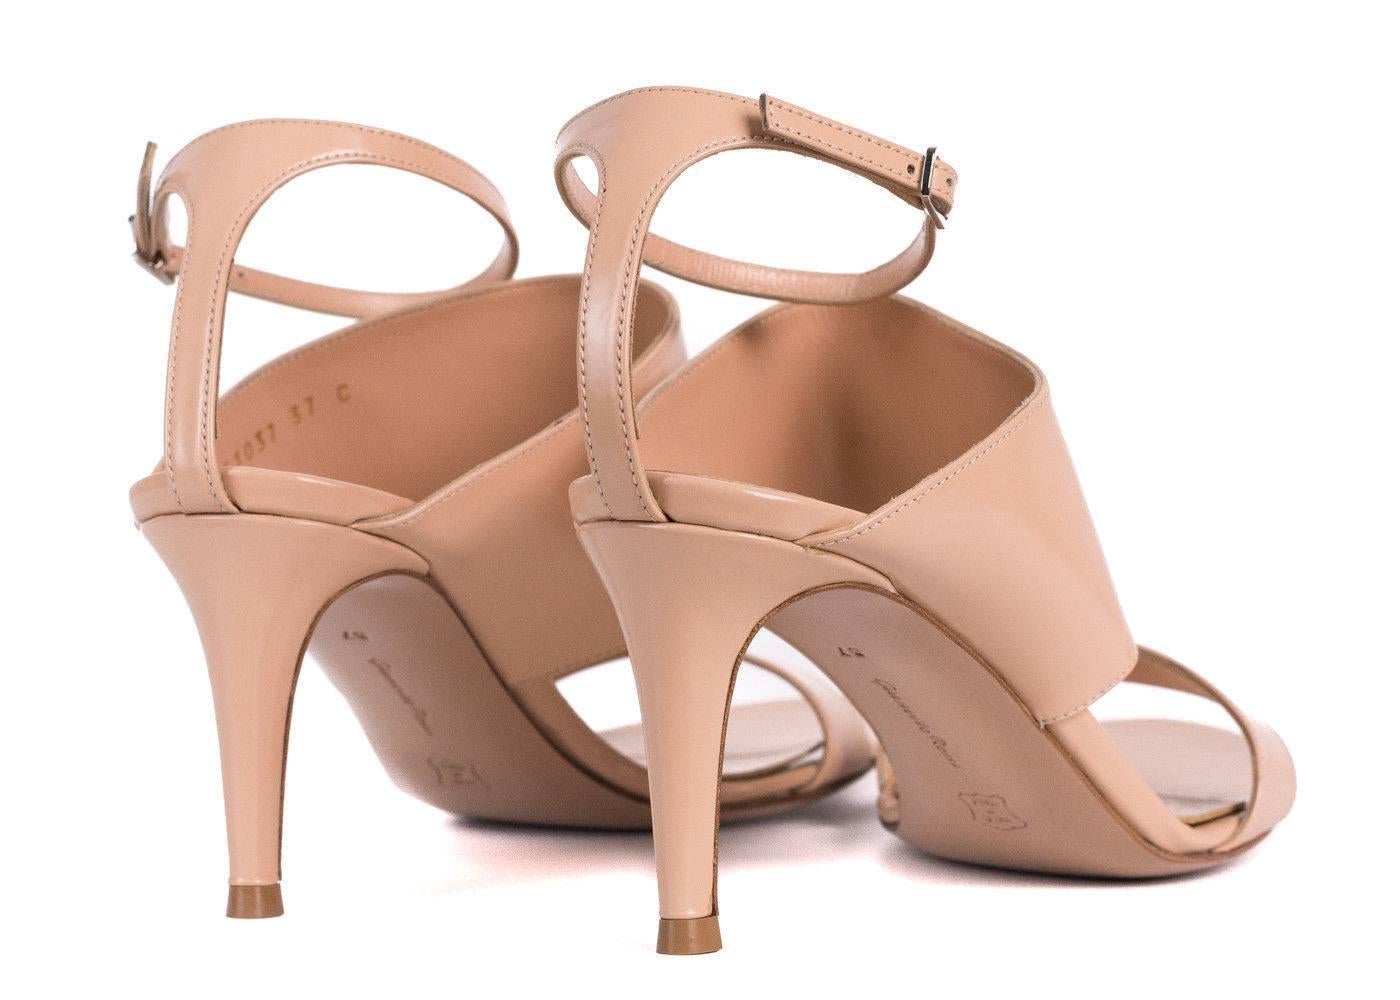 Gianvito Rossi Nude Leather Ankle Strap Mule Sandal Heels  In New Condition For Sale In Brooklyn, NY